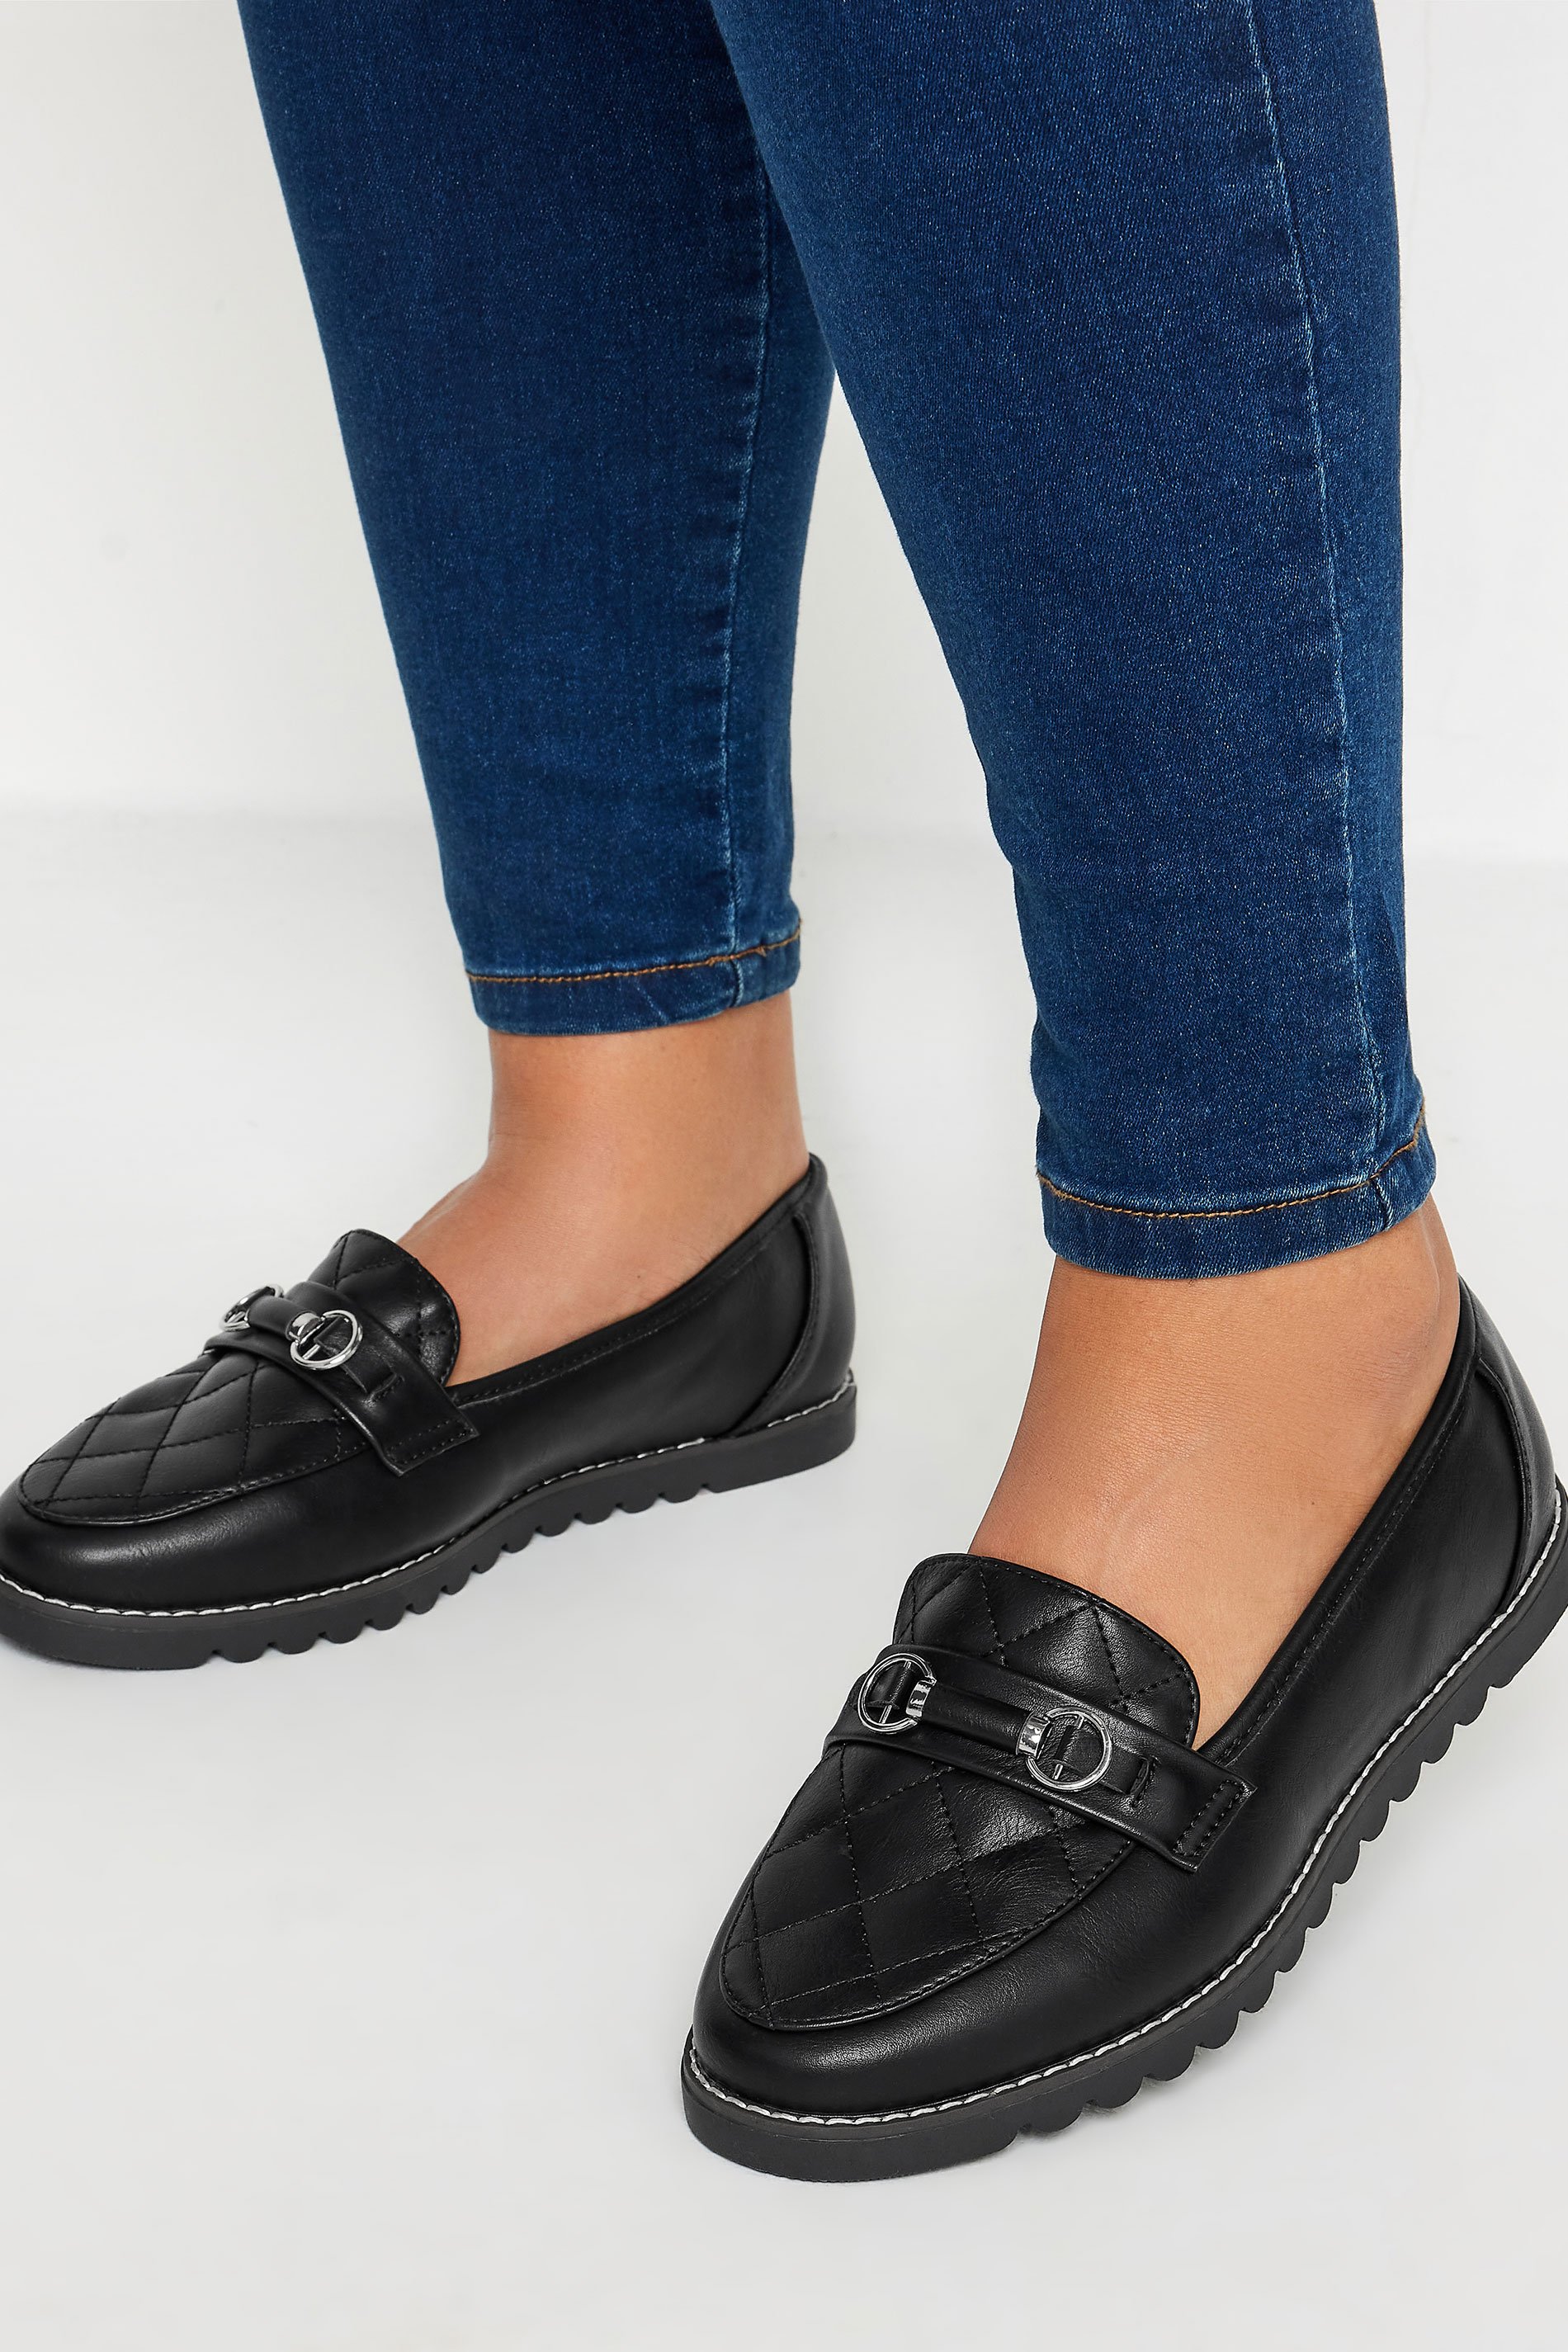 Black Quilted Loafer In Extra Wide EEE Fit | Yours Clothing 1